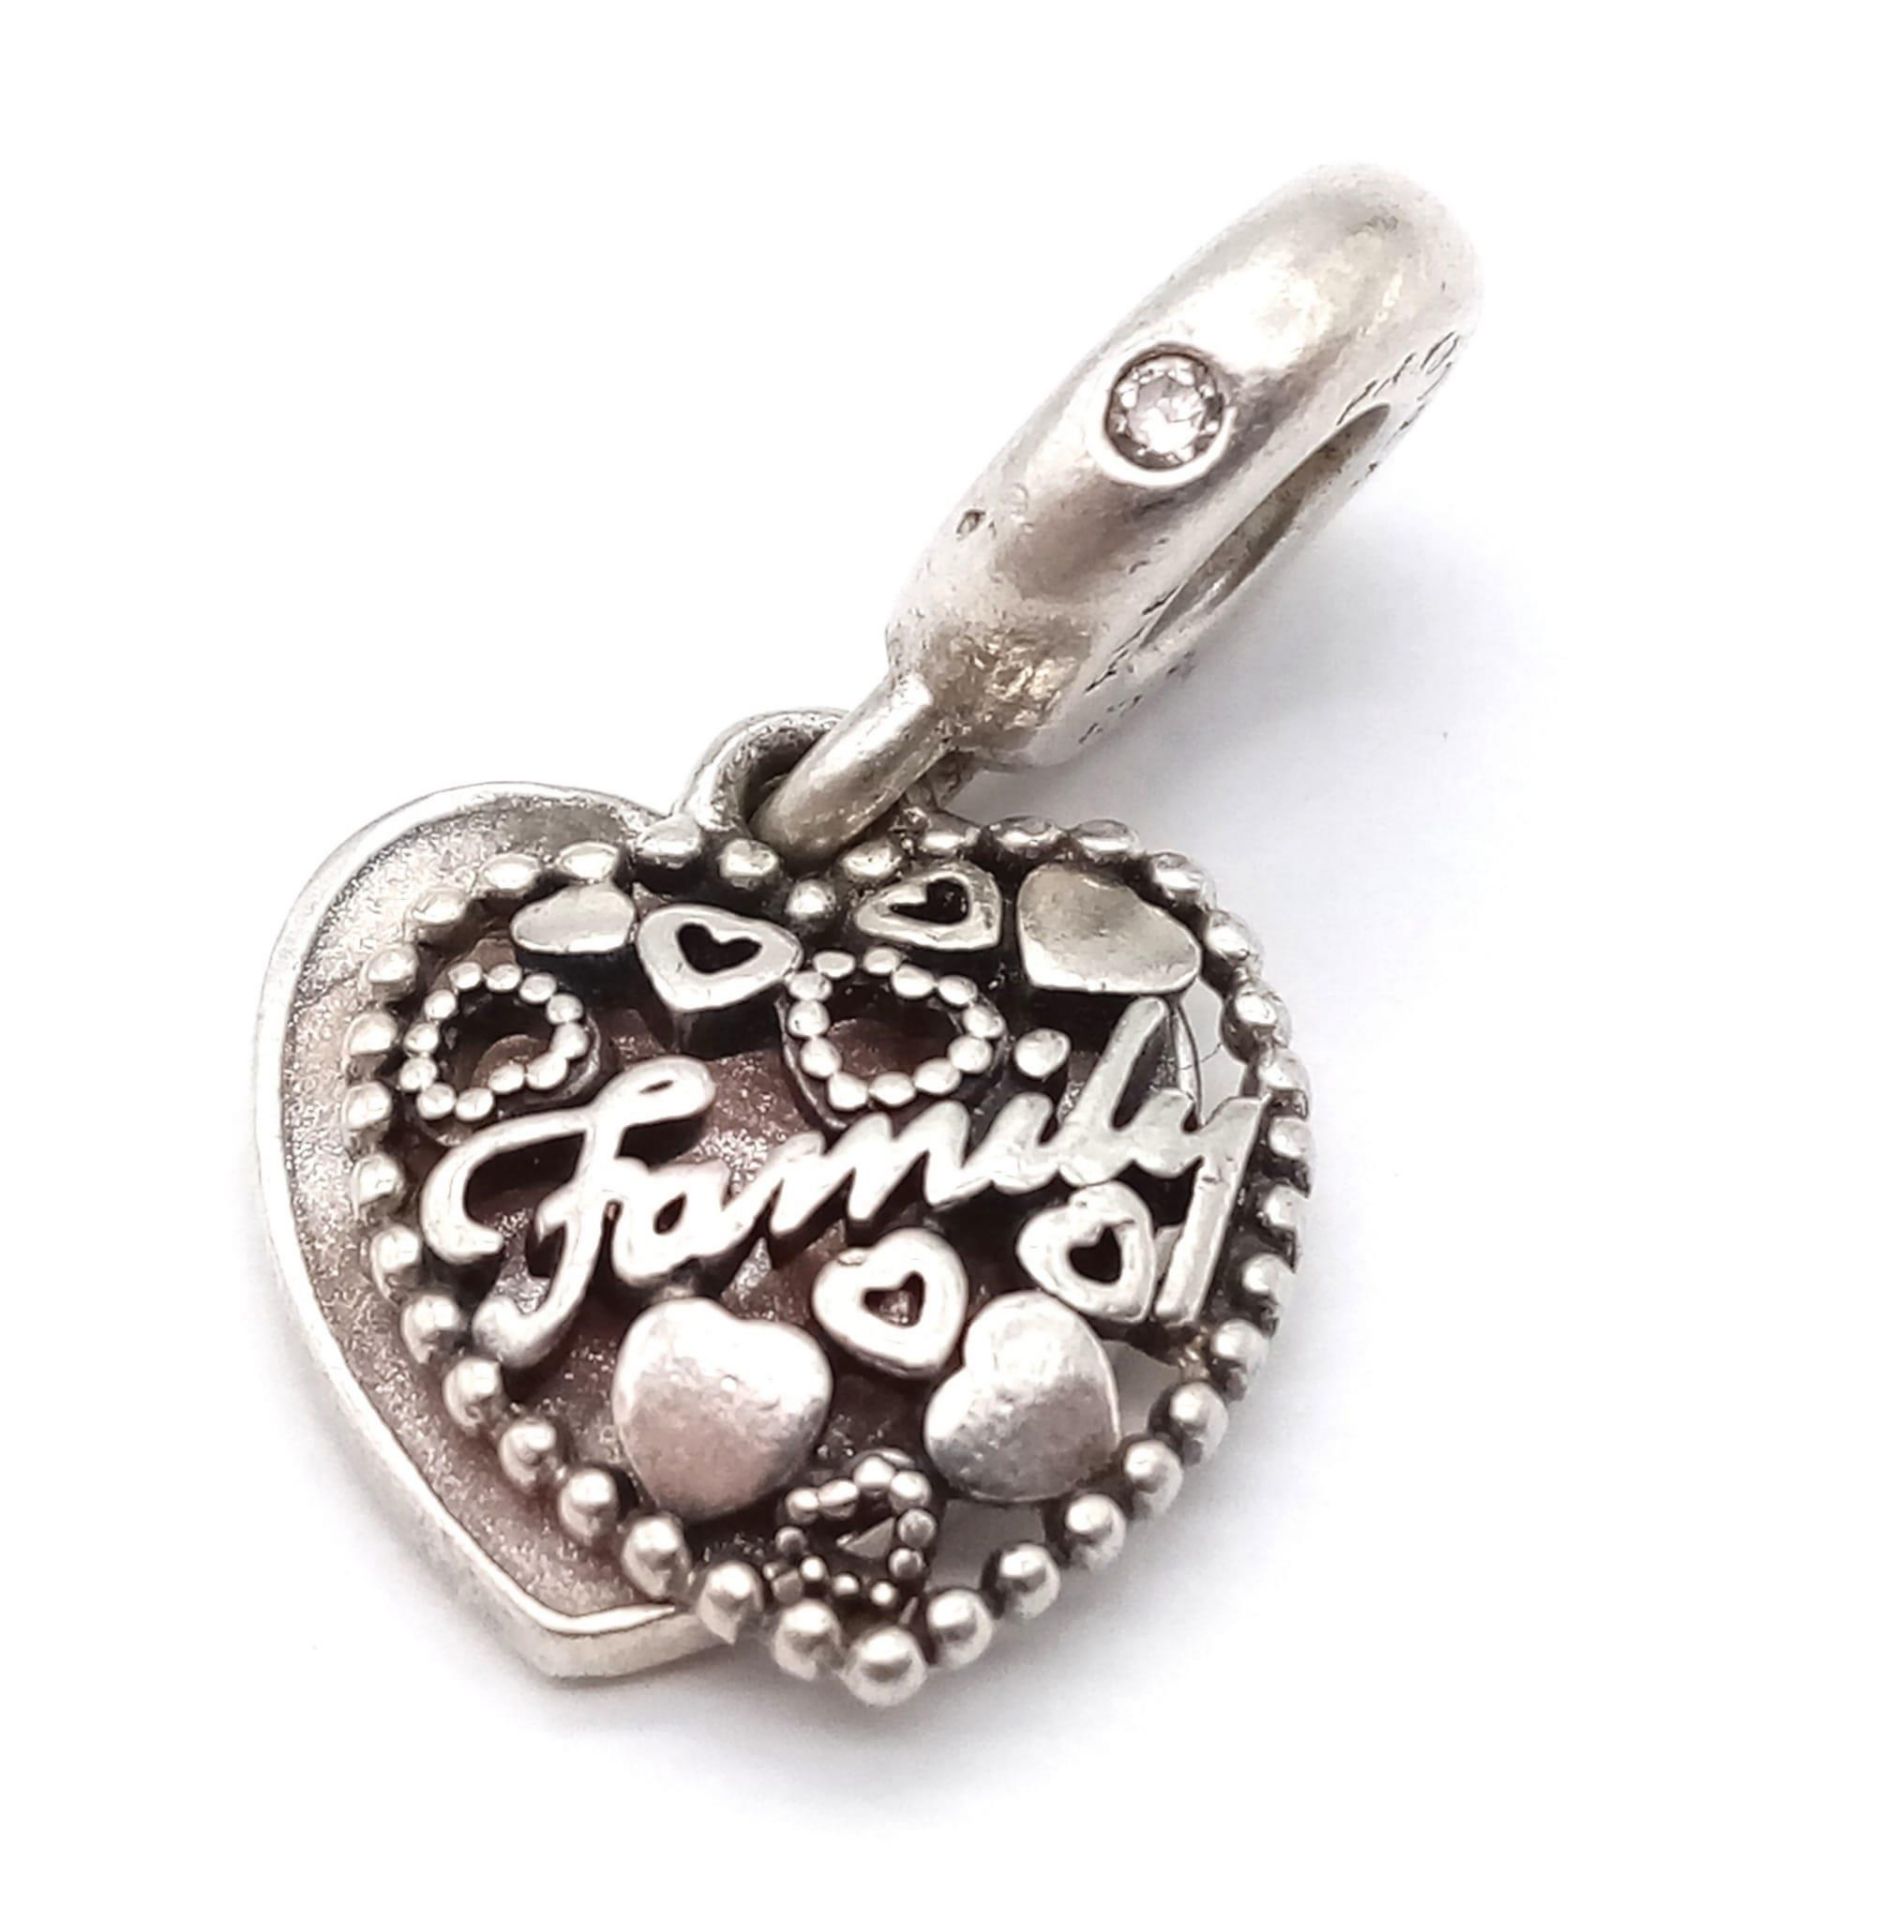 2 x Pandora Sterling Silver Heart Charms - one says 'Family' and the other says 'First My Mother, - Image 9 of 13